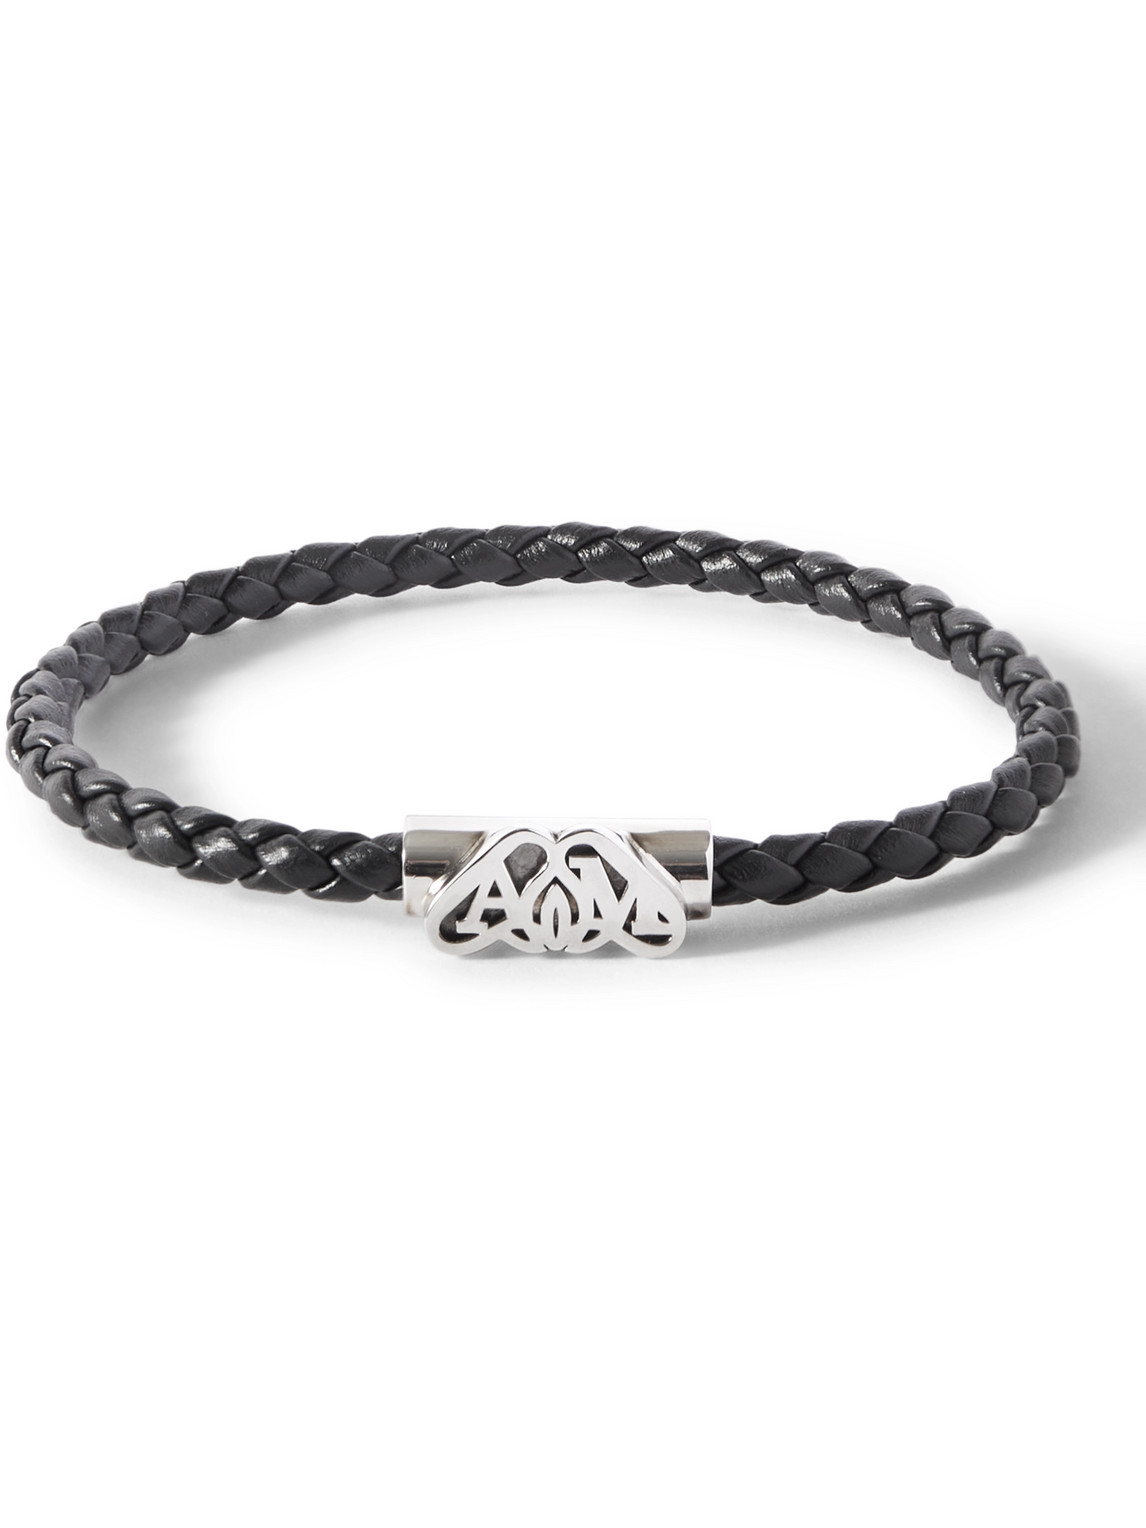 Alexander Mcqueen Braided Leather And Silver-tone Bracelet